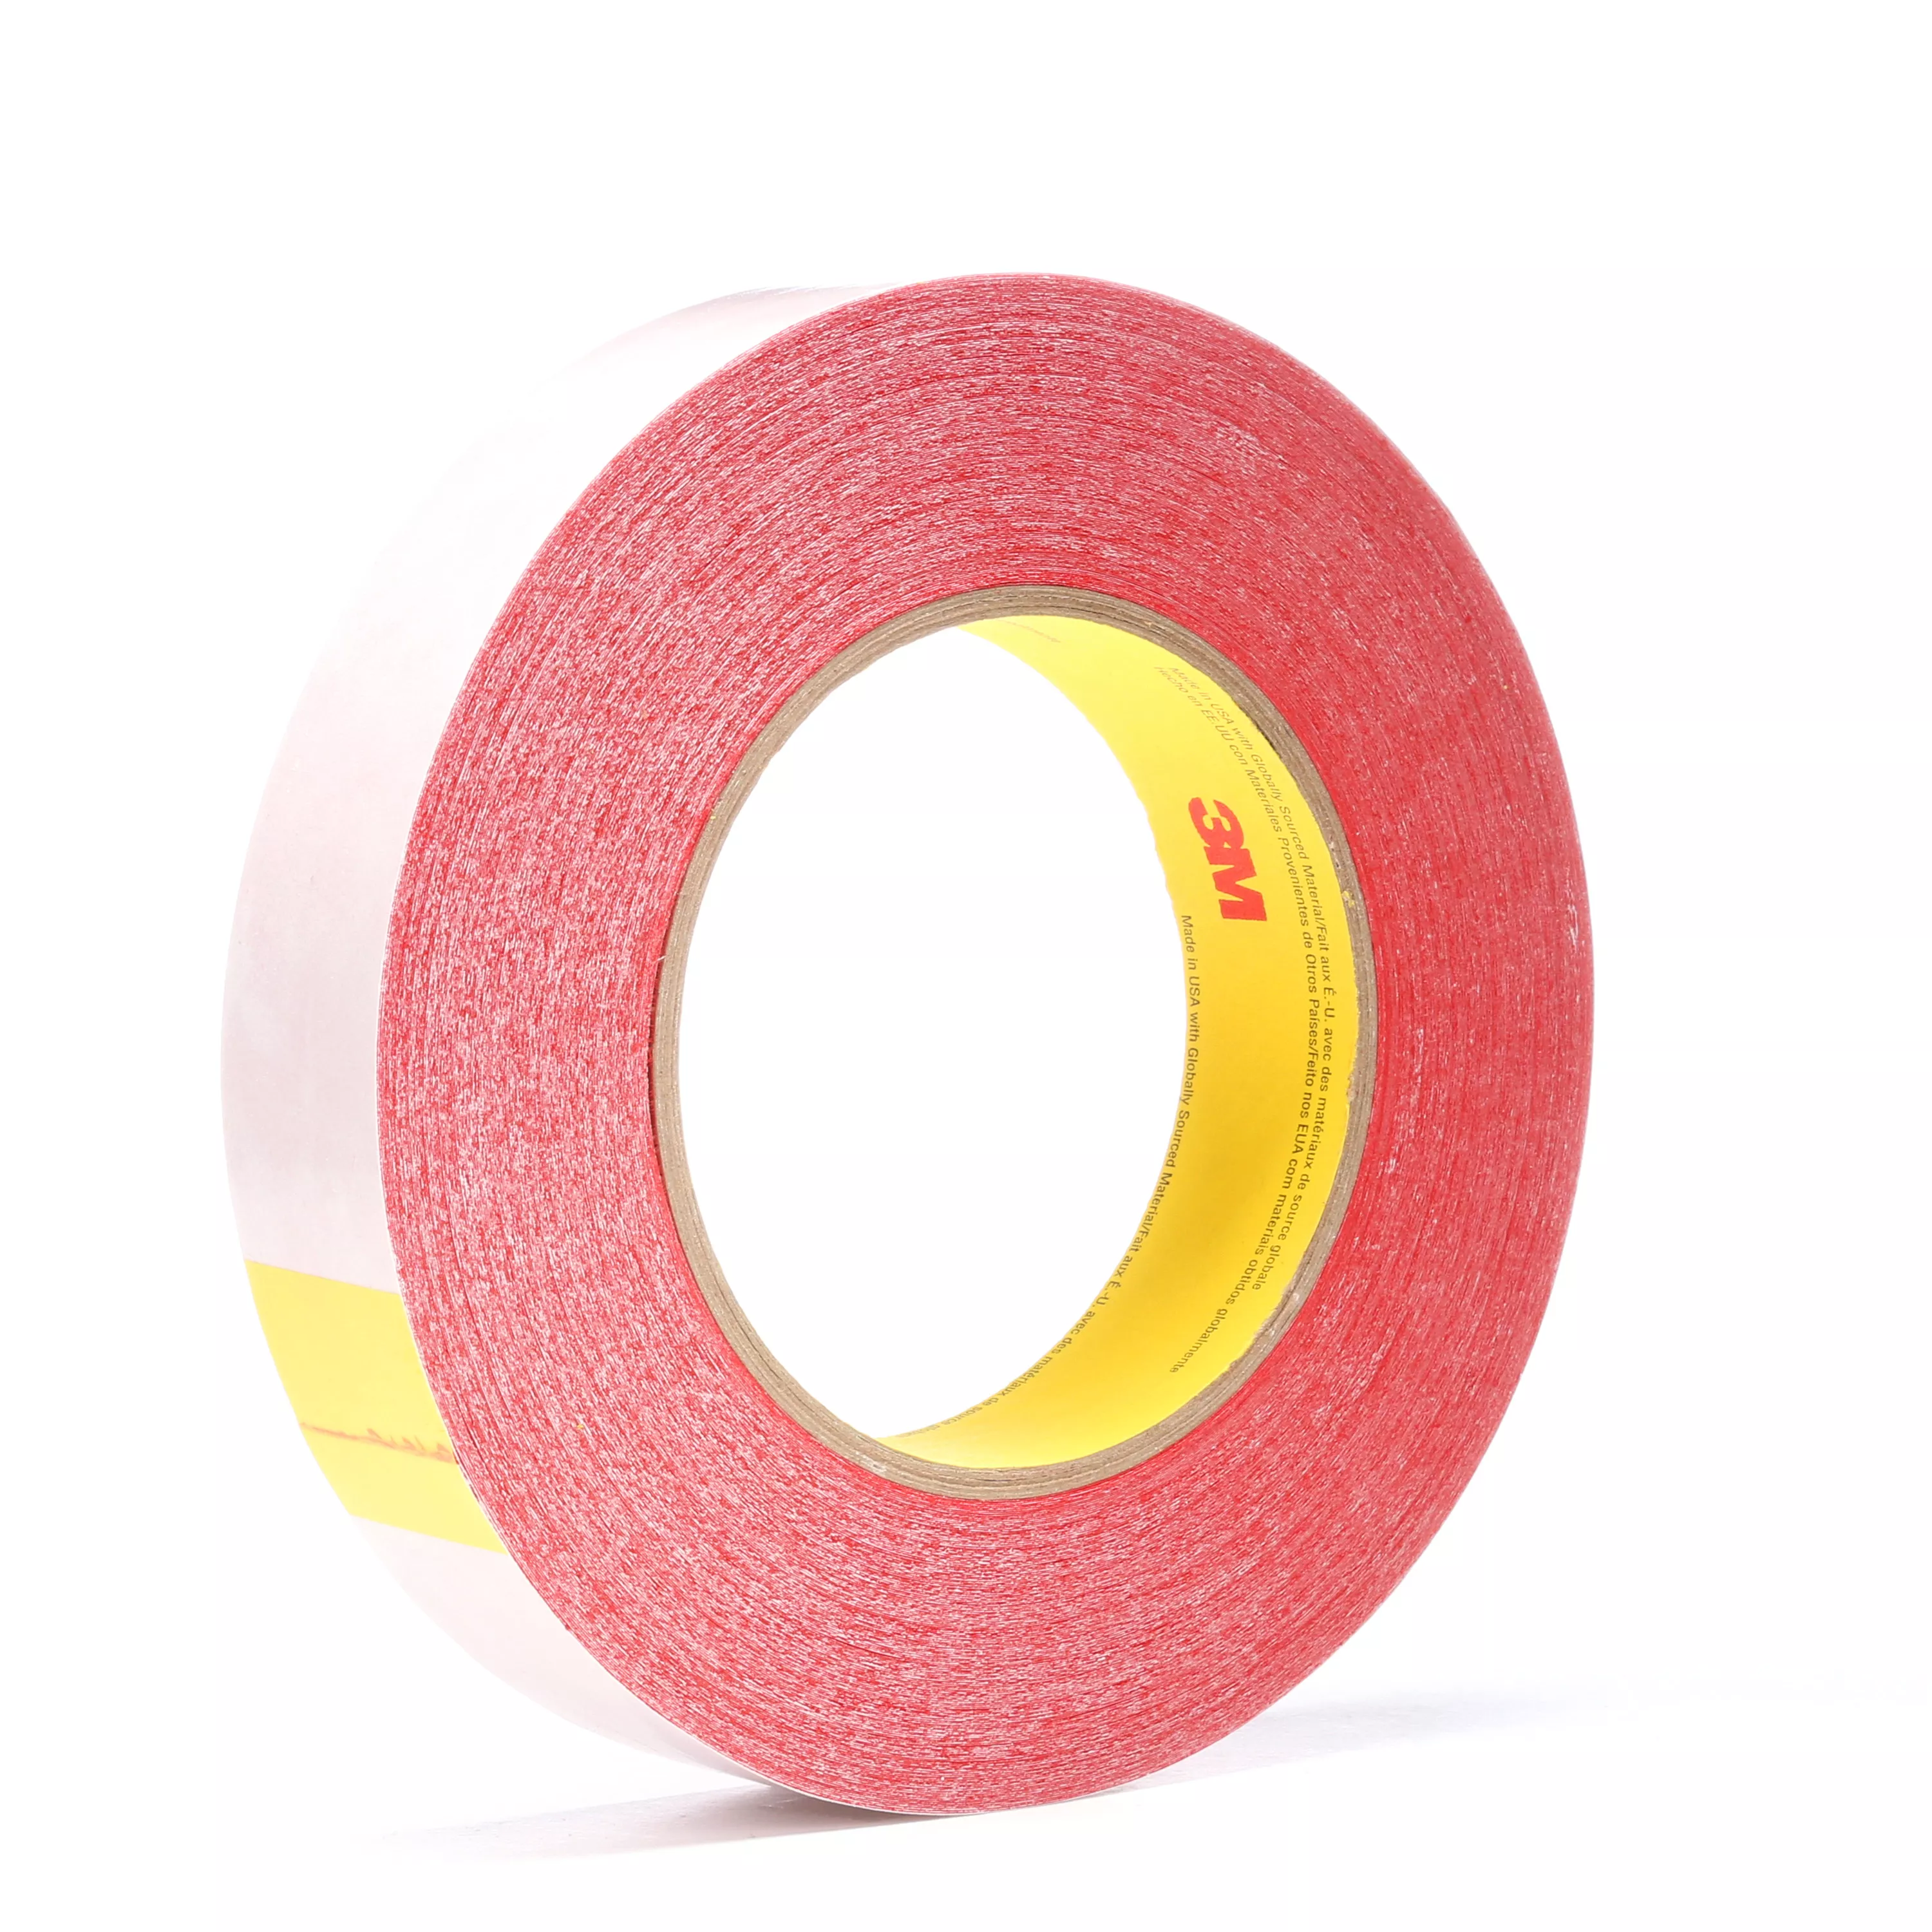 3M™ Double Coated Tape 9737R, Red, 24 mm x 55 m, 3.5 mil, 48 Roll/Case